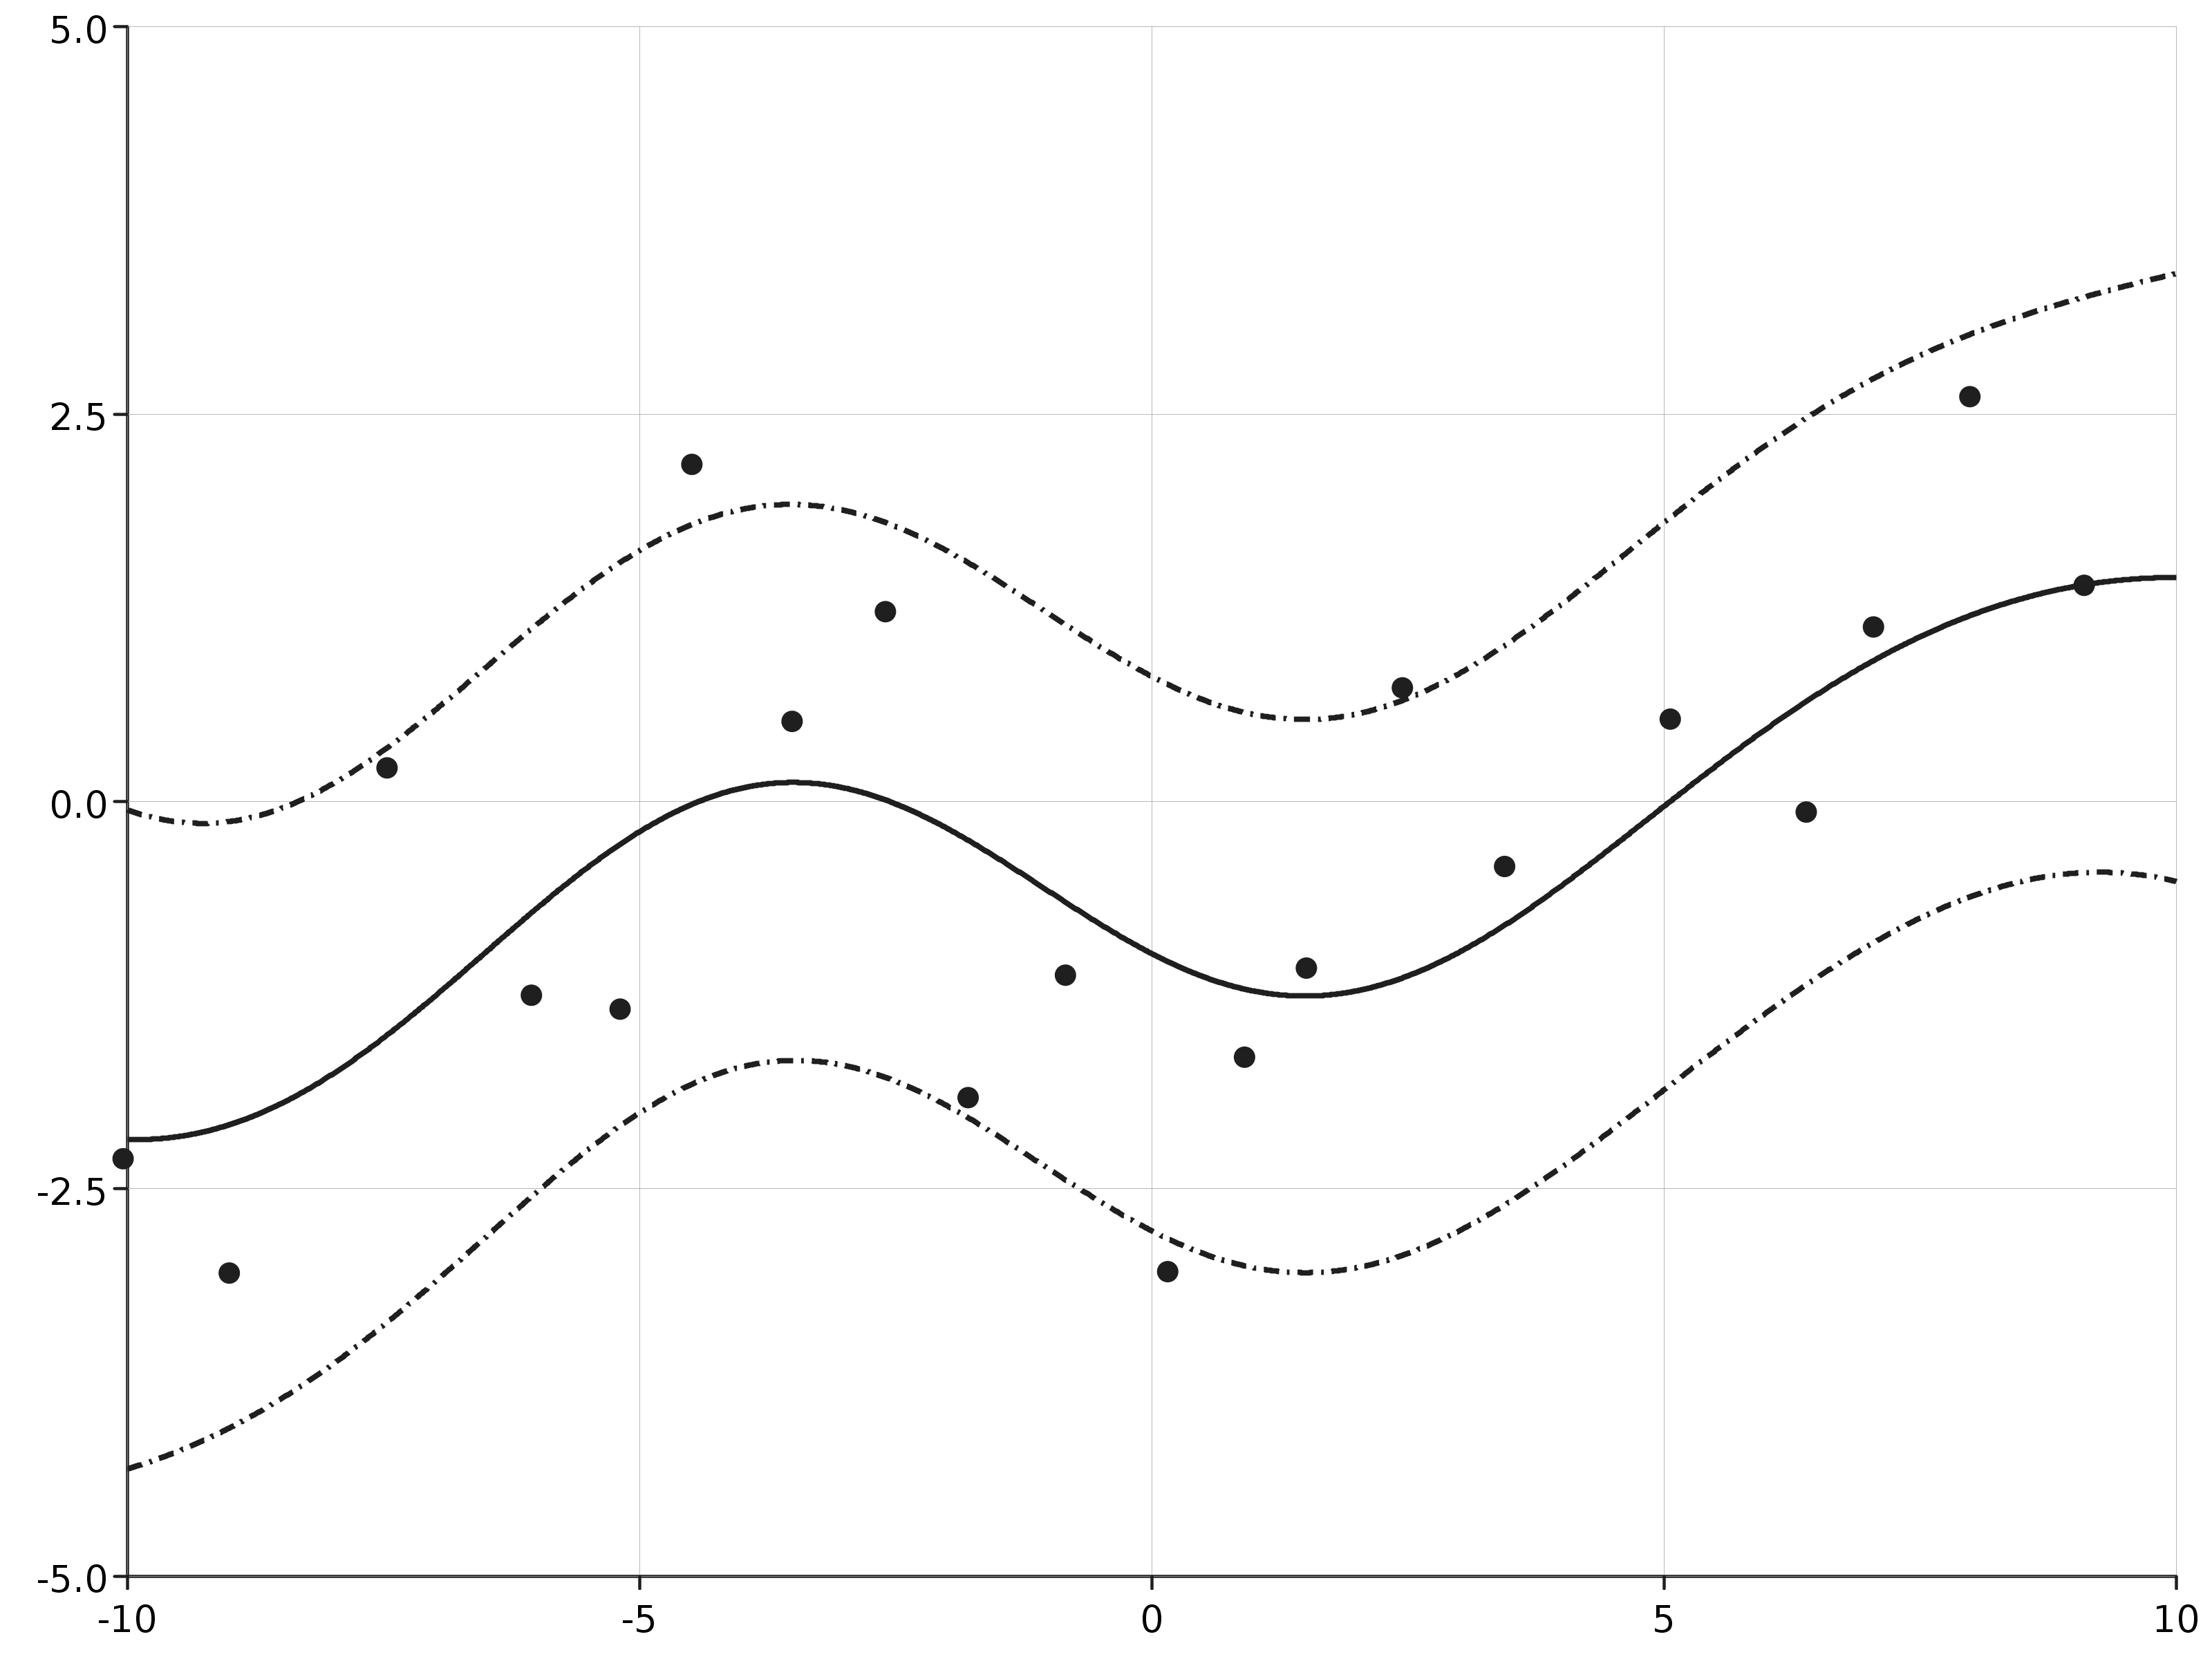 Posterior distribution of Gaussian Process